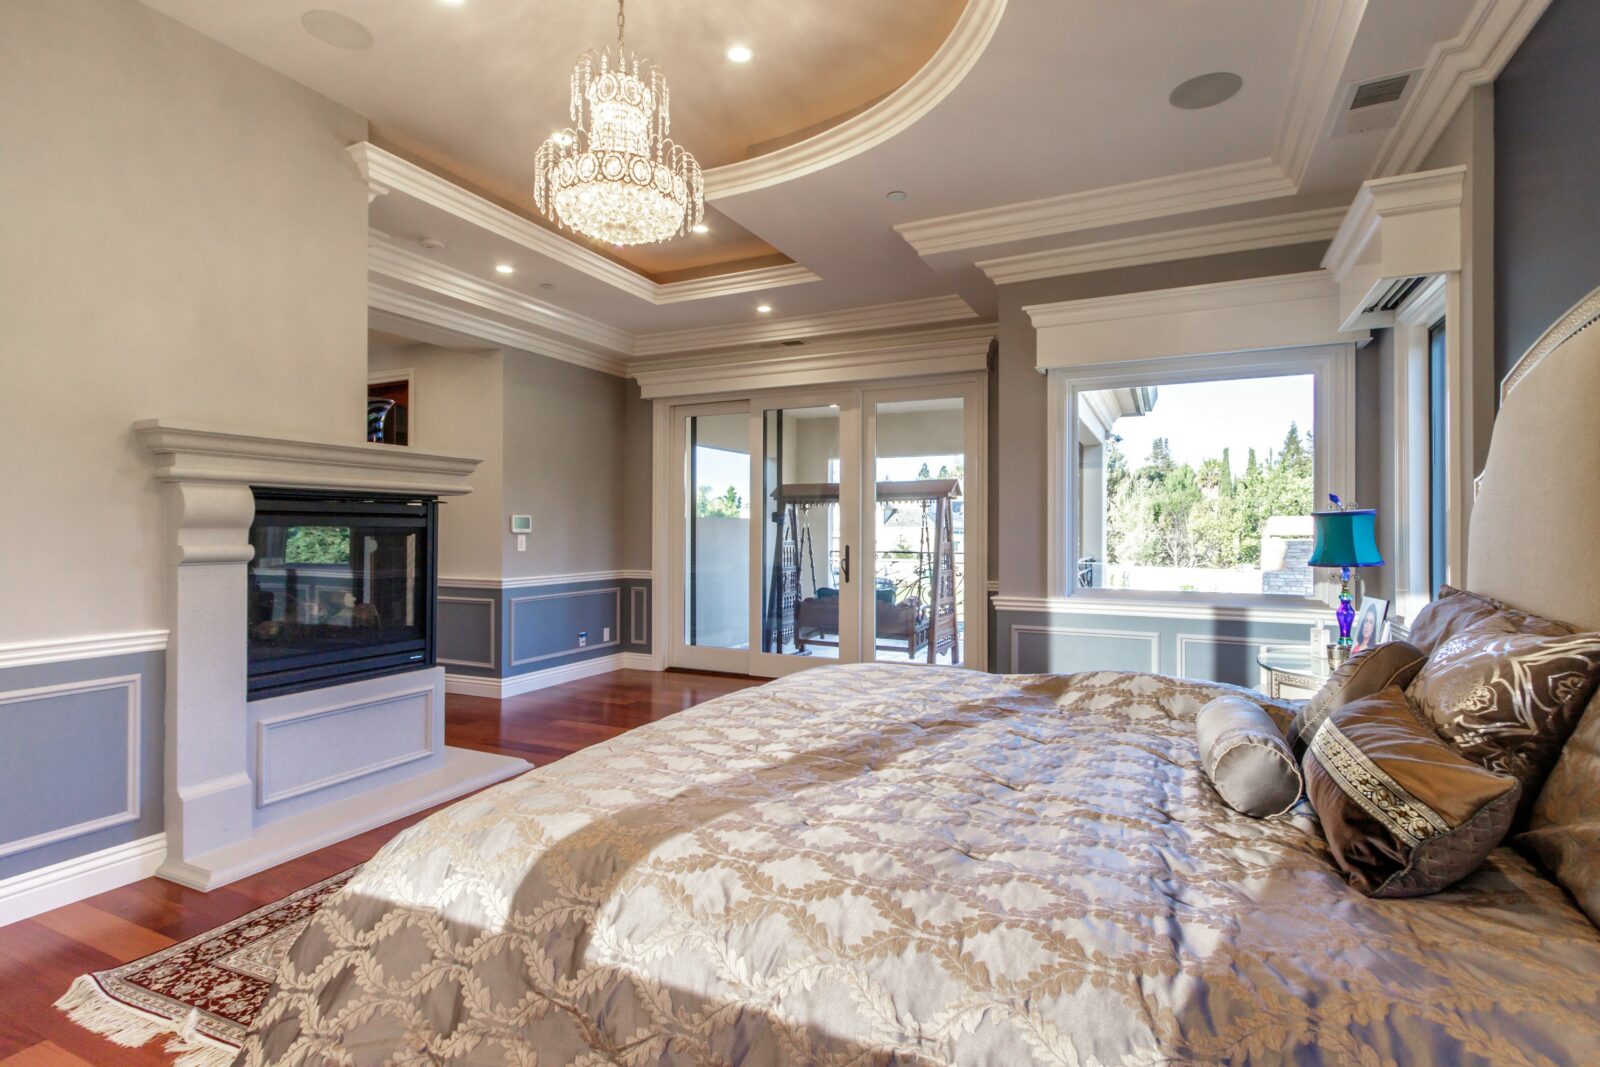 Luxurious Master Bedroom design for custom built homes in Cupertino